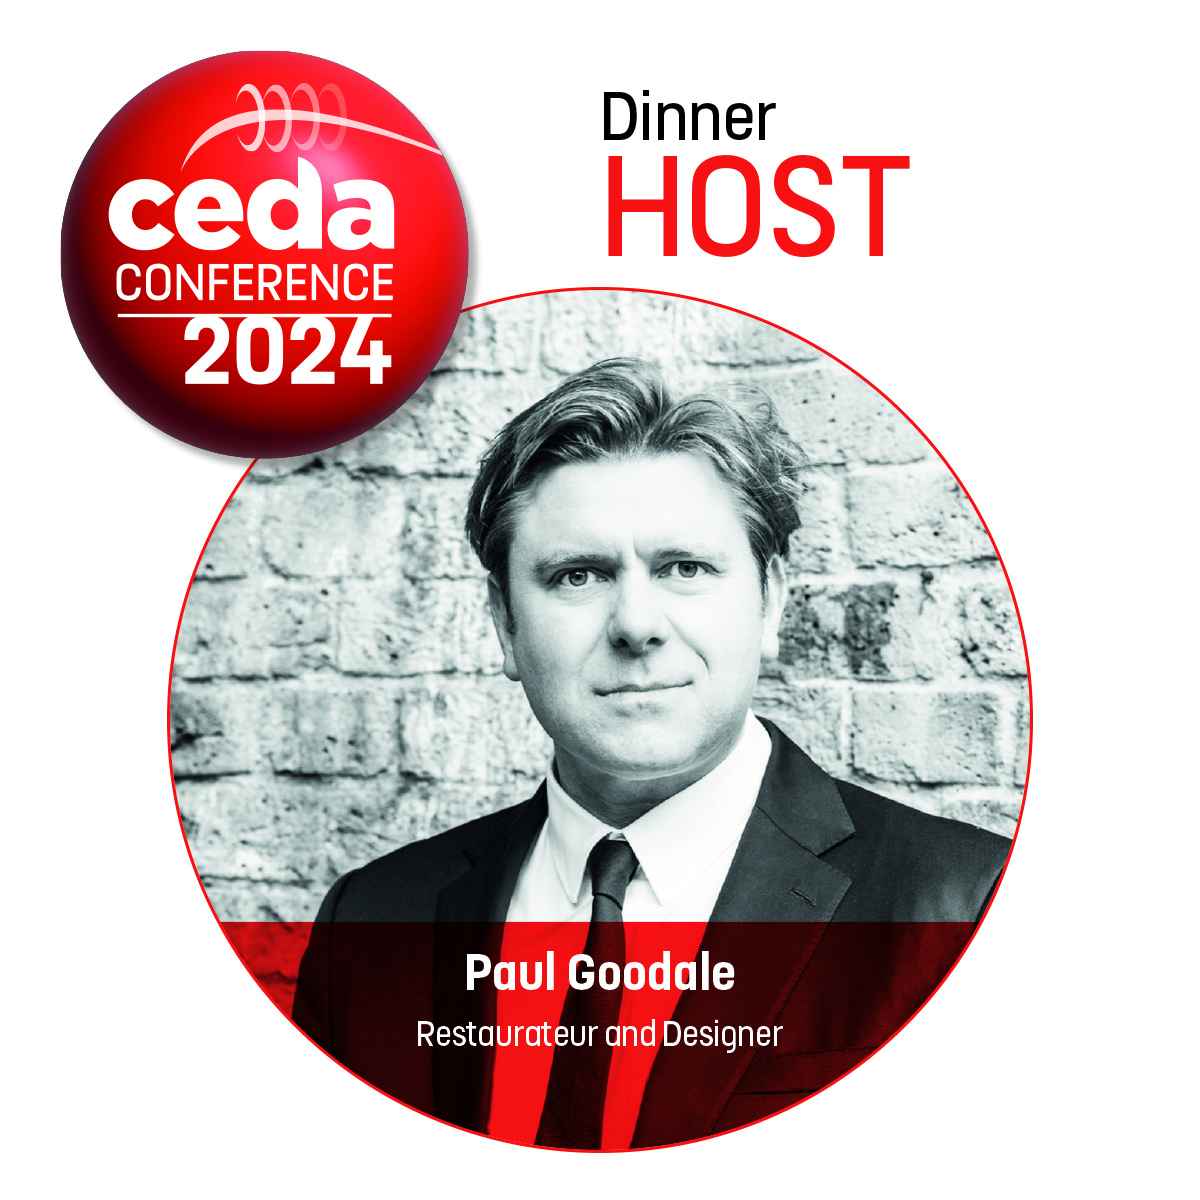 Paul Goodale will be be our dinner host ✅ Paul Goodale is a Restaurateur and Designer who has operated everything from luxury hotels and Private Members Clubs to gastro pubs and self-service food courts. Read more here: loom.ly/43lXOeg